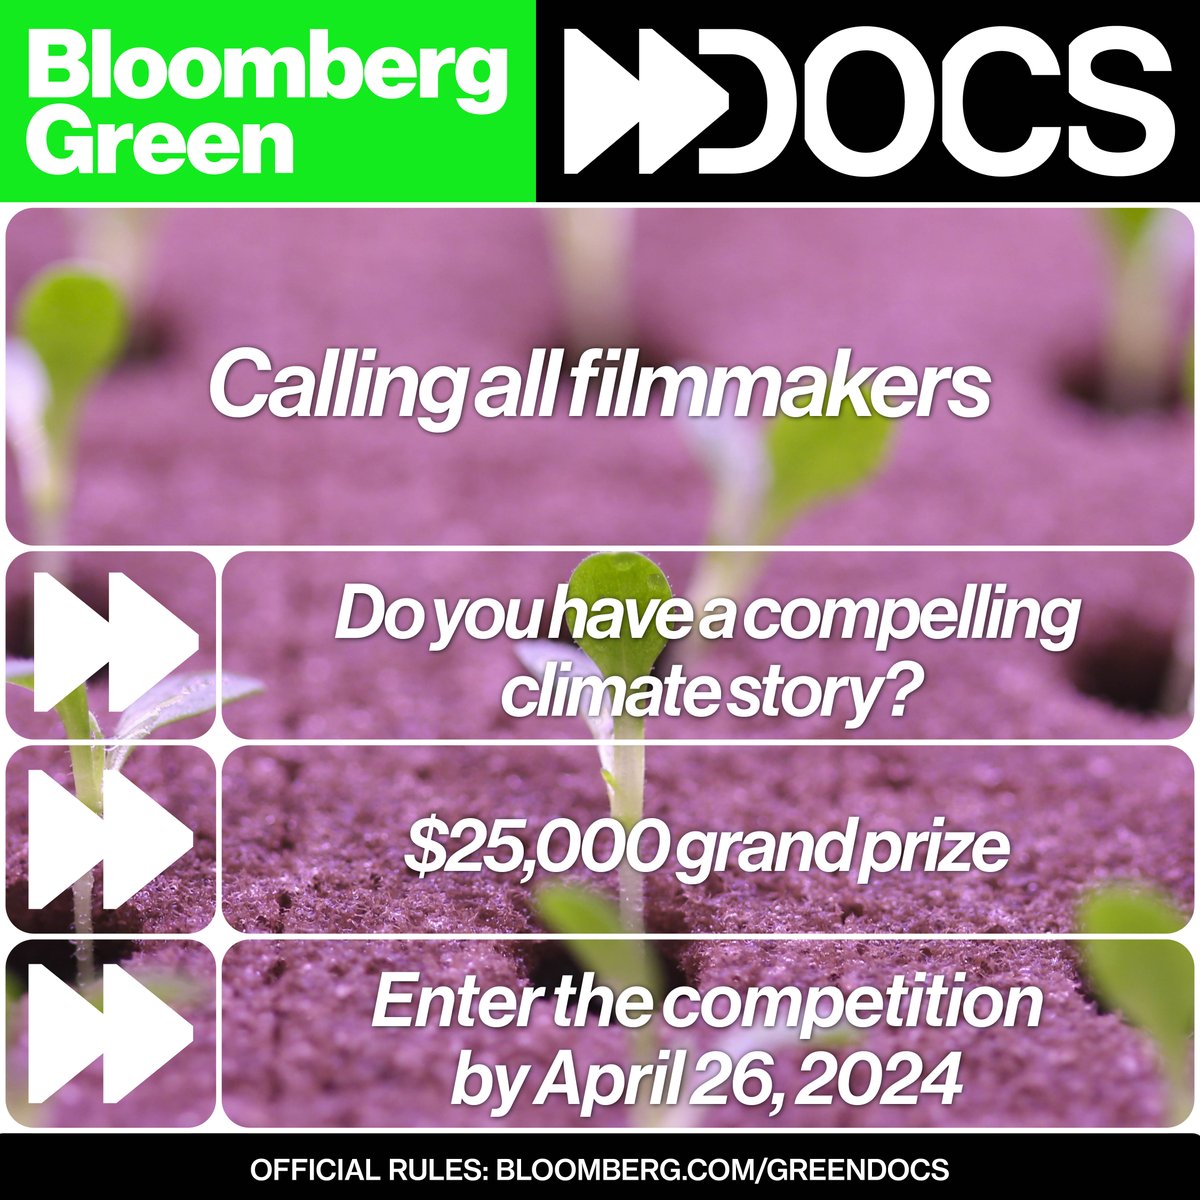 Attention documentary filmmakers! We want to see your view of our climate future. Submit your short film to our Bloomberg Green Docs competition by April 26, 2024. Please share! Grand prize: $25,000 Official Rules ➡️ bloom.bg/3qiOFPe